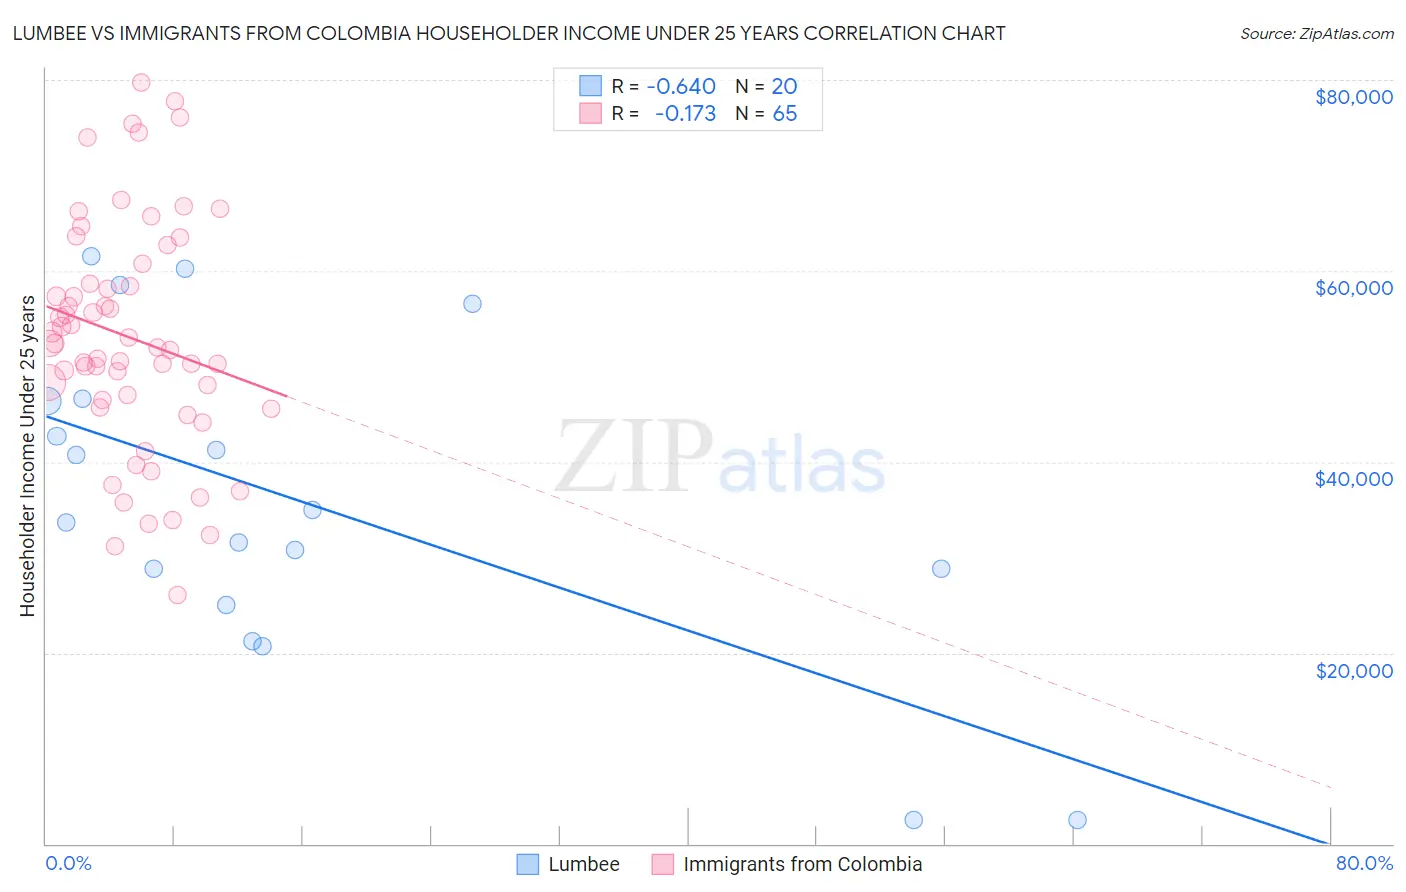 Lumbee vs Immigrants from Colombia Householder Income Under 25 years